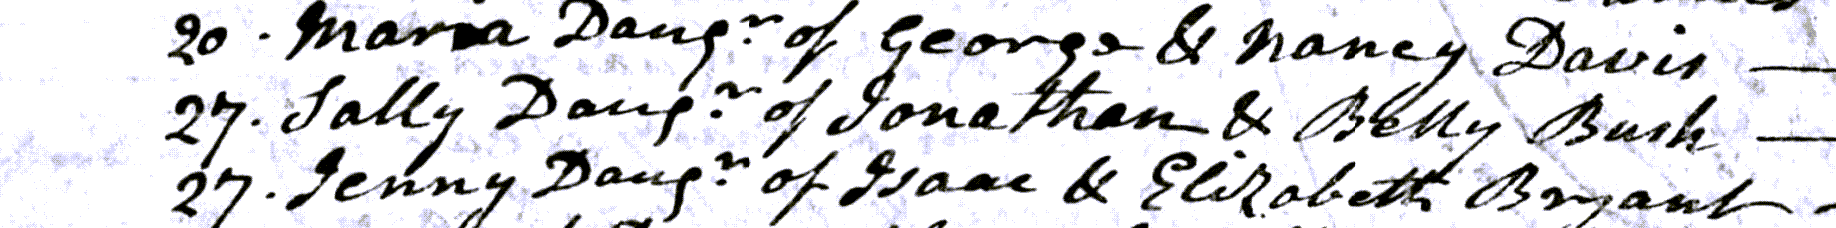 Figure 3: Baptism Entry for Sally (Bush) Couch